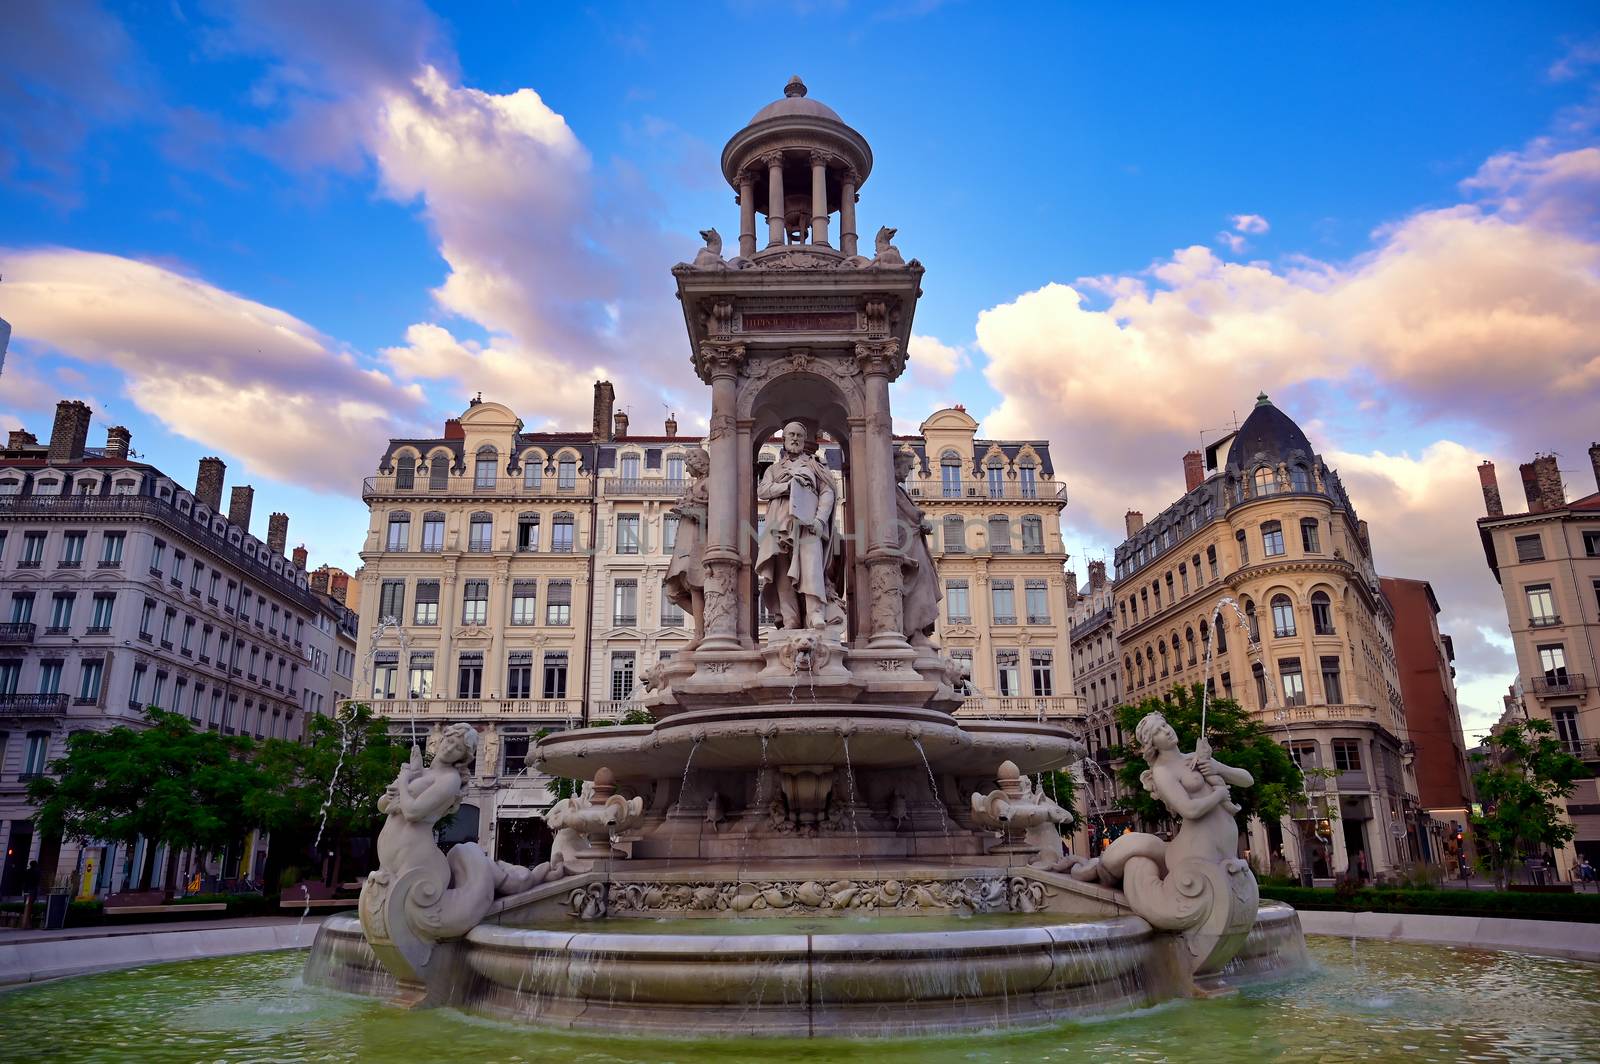 The fountain on Place des Jacobins in Lyon, France by jbyard22